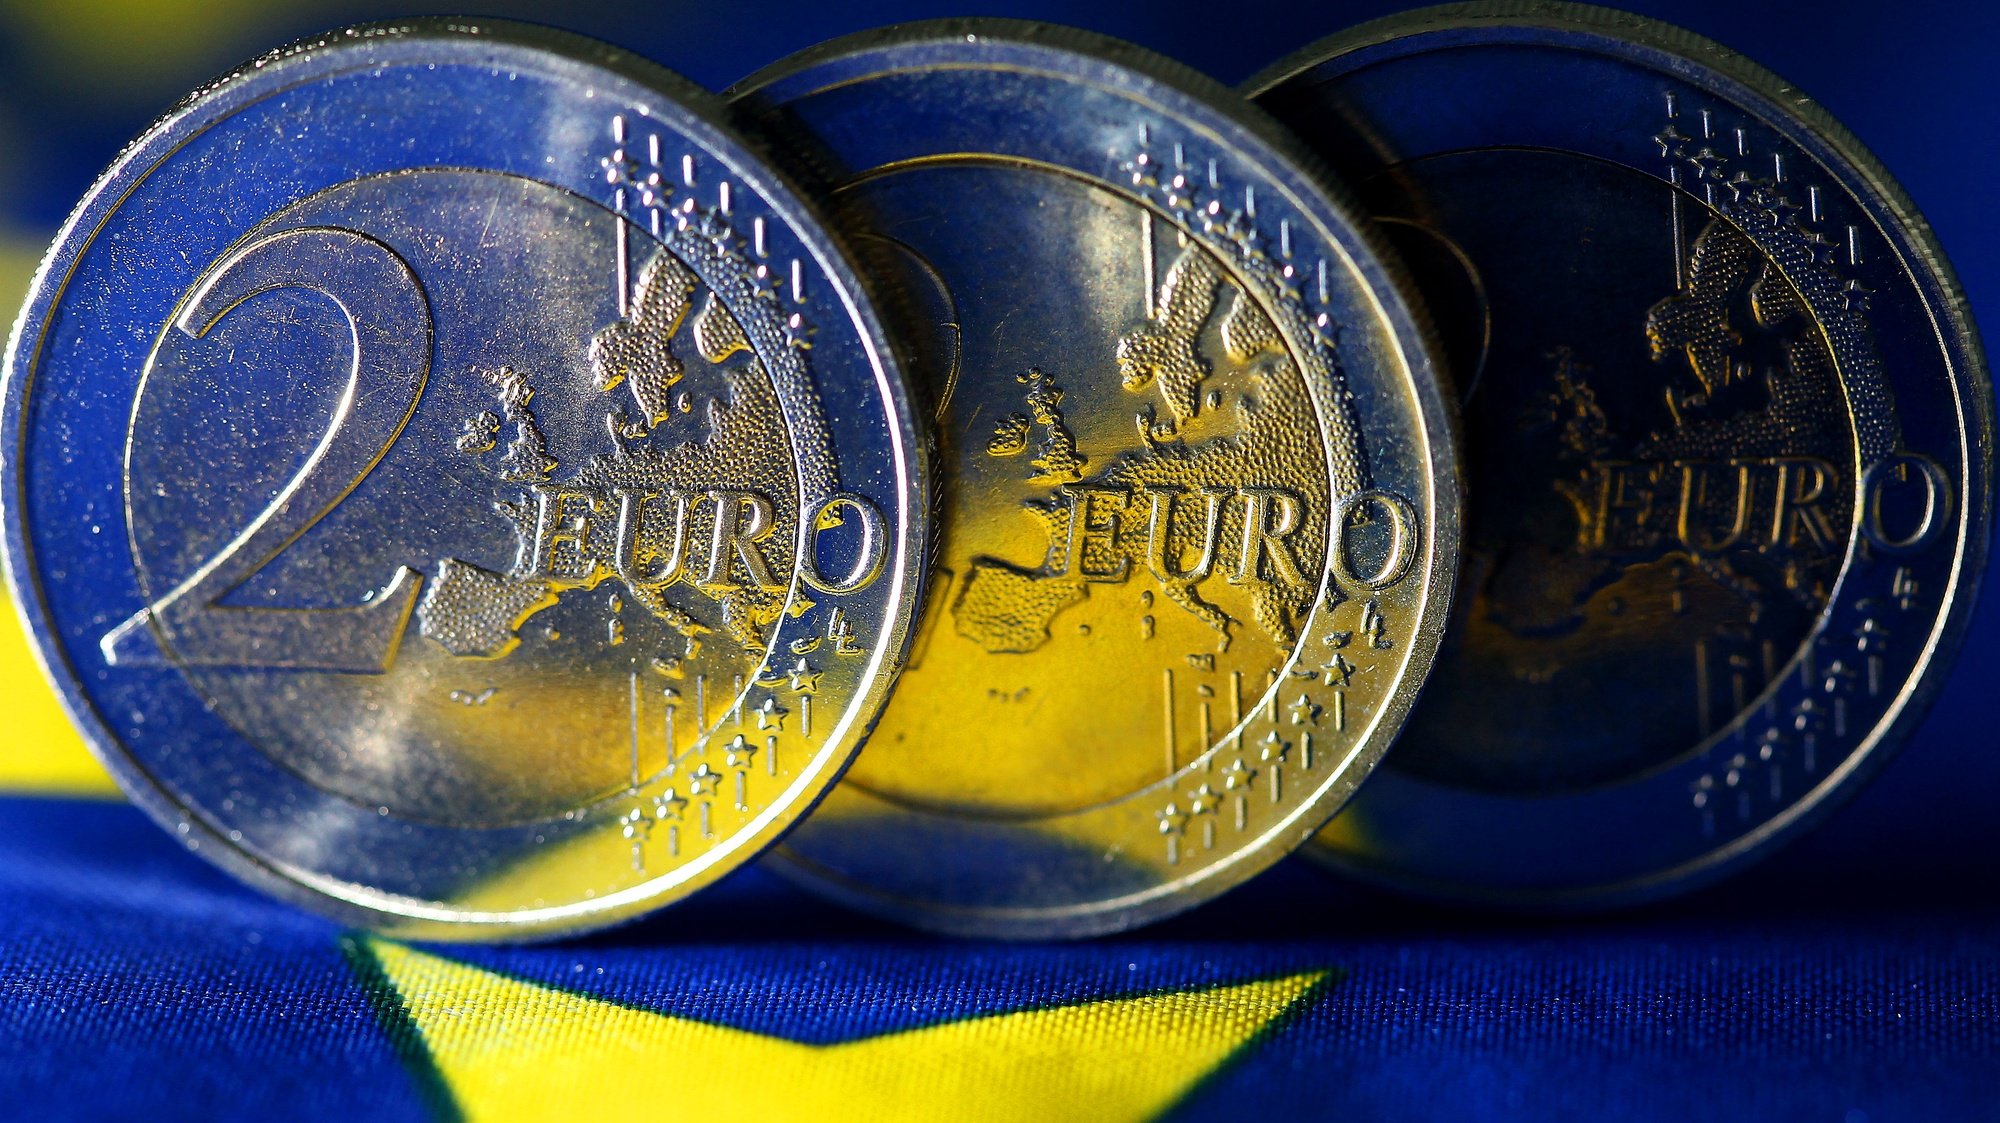 epa03329370 An illustration image shows Euro coins standing on a European flag in Cologne, Germany, 31 July 2012.  EPA/OLIVER BERG